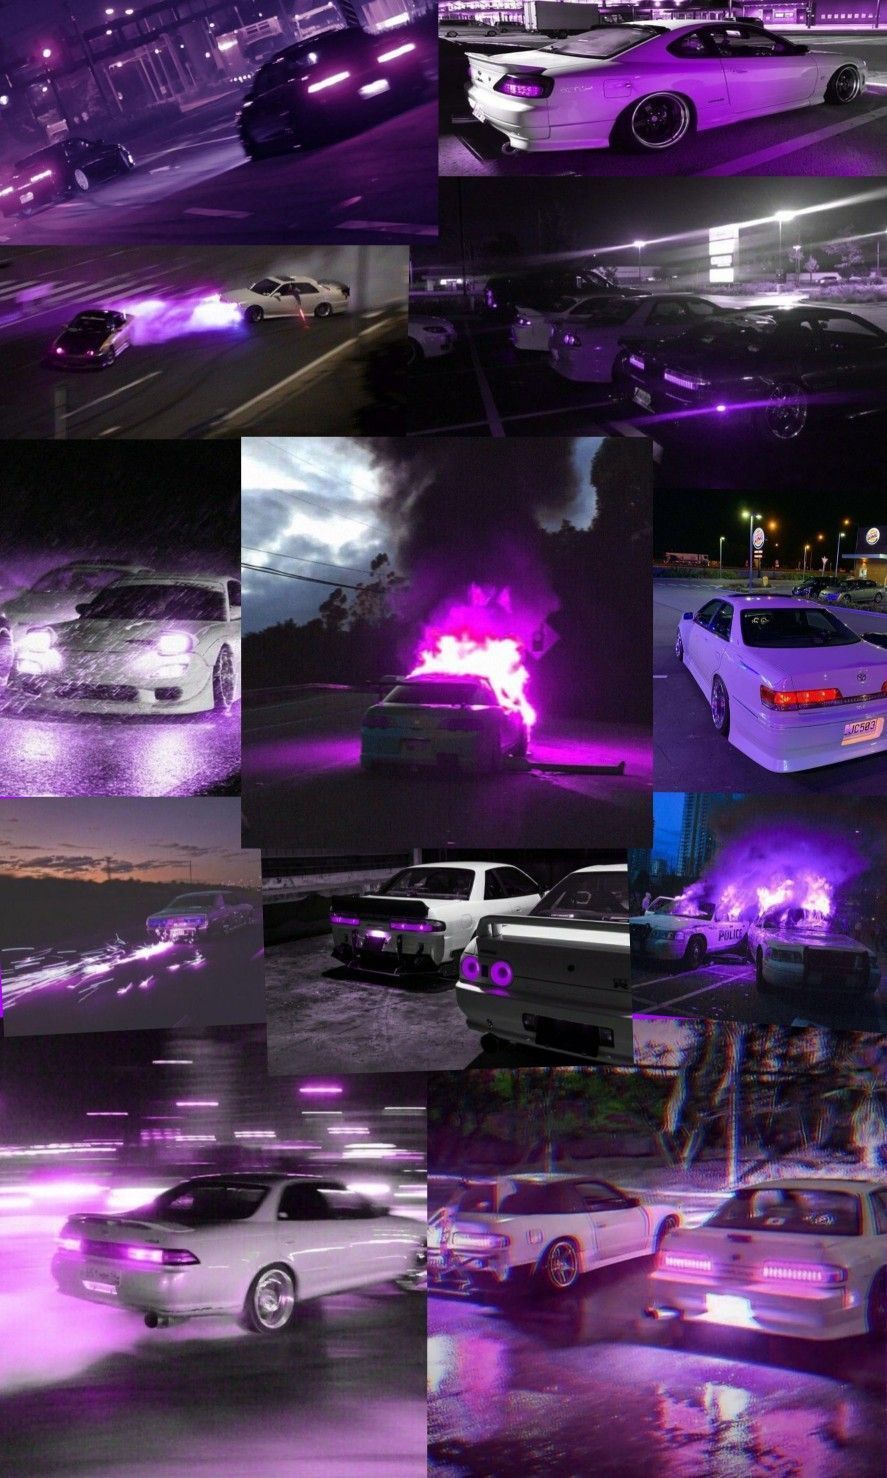 A collage of purple images with cars in them - JDM